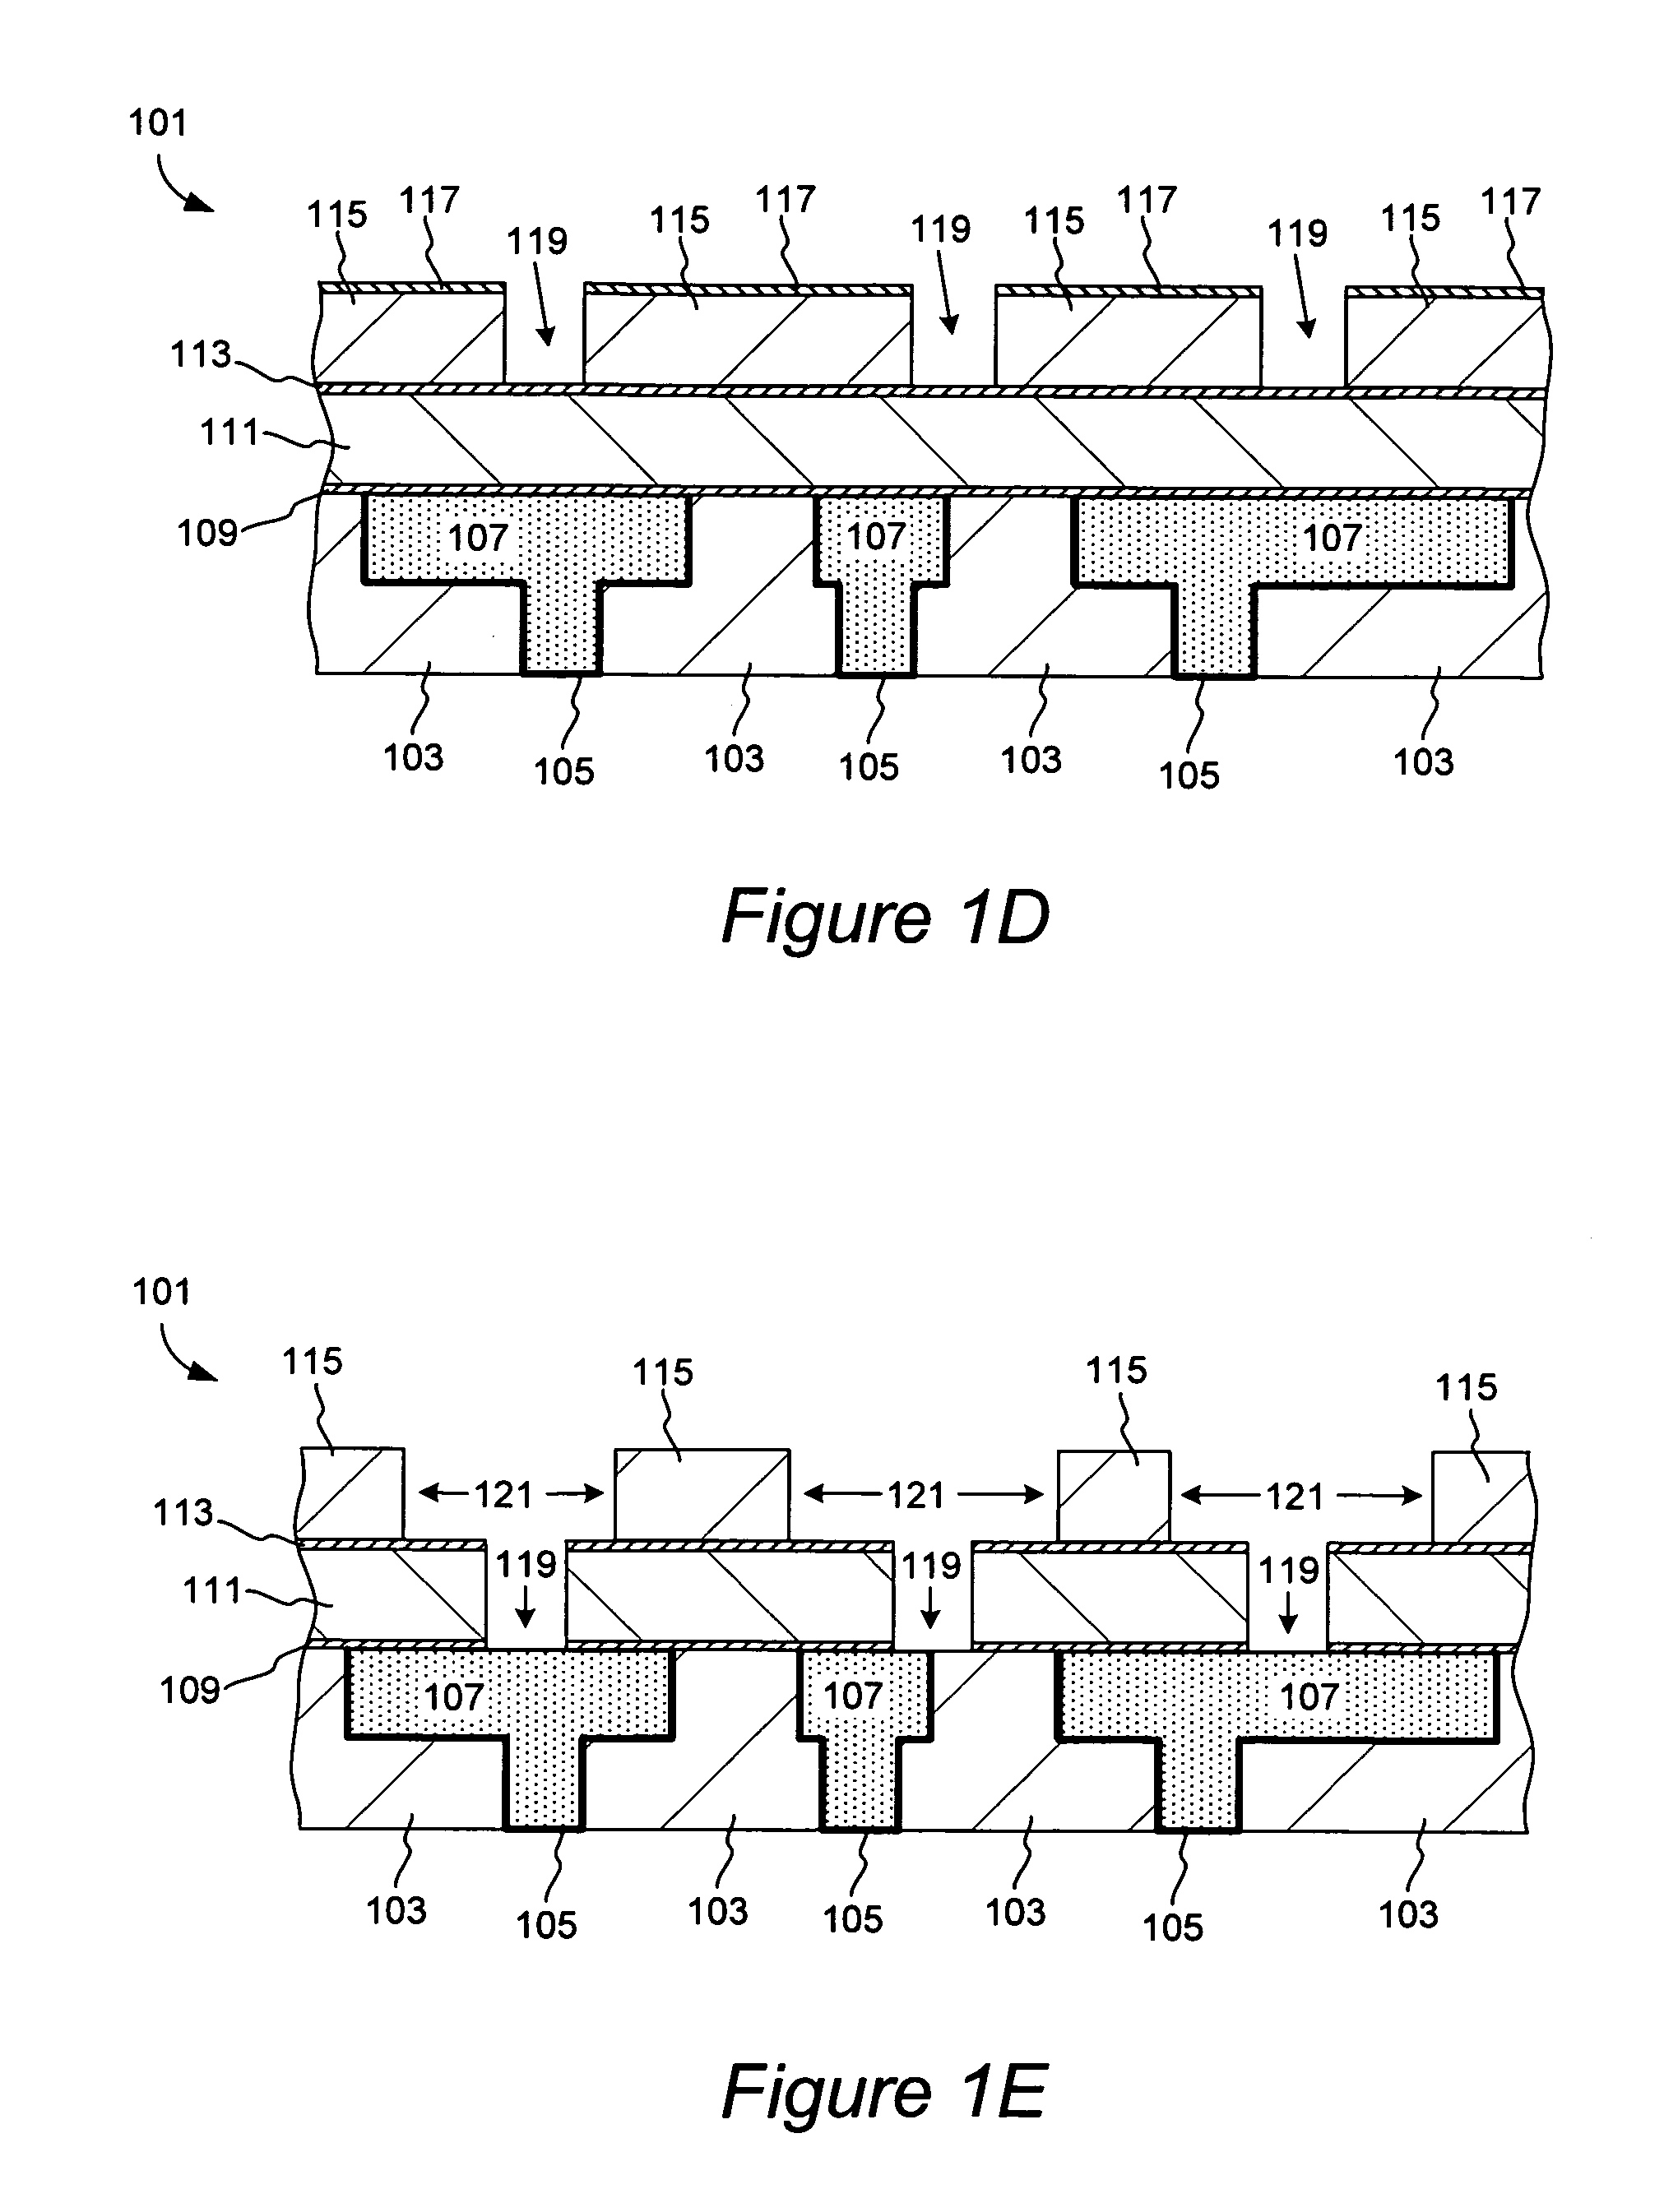 Deposition of doped copper seed layers having improved reliability